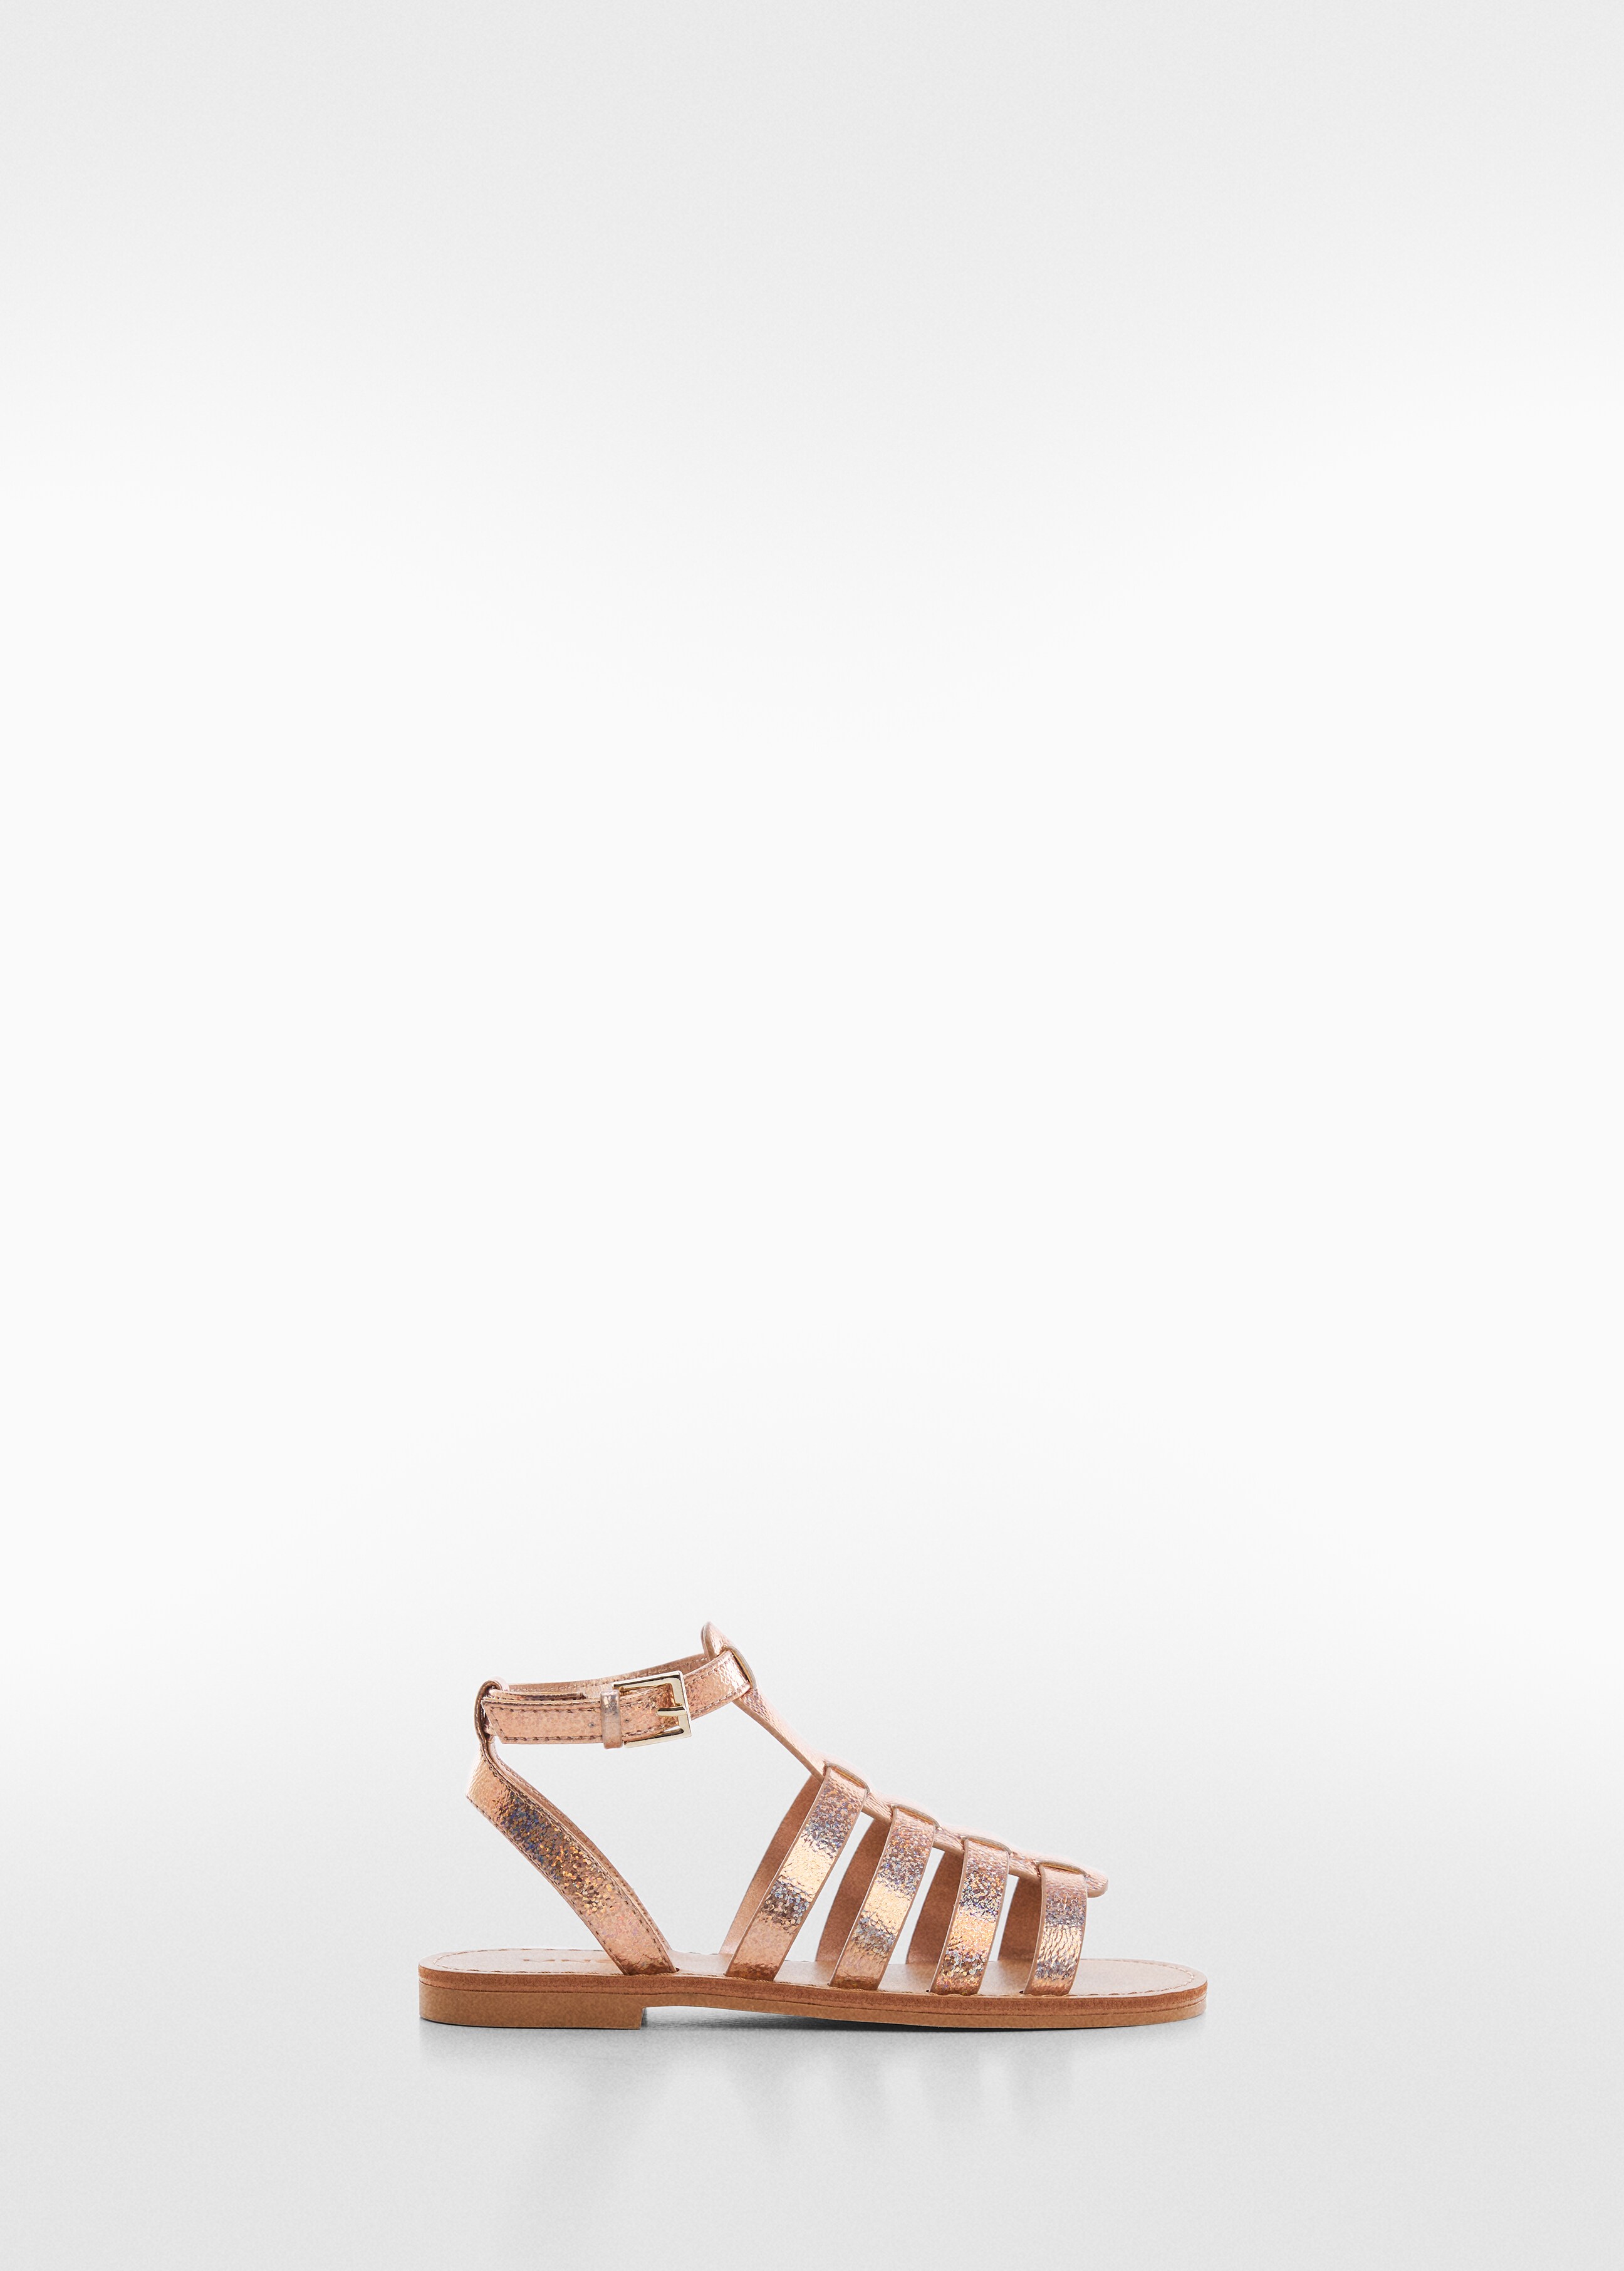 Buckle strap sandals - Article without model